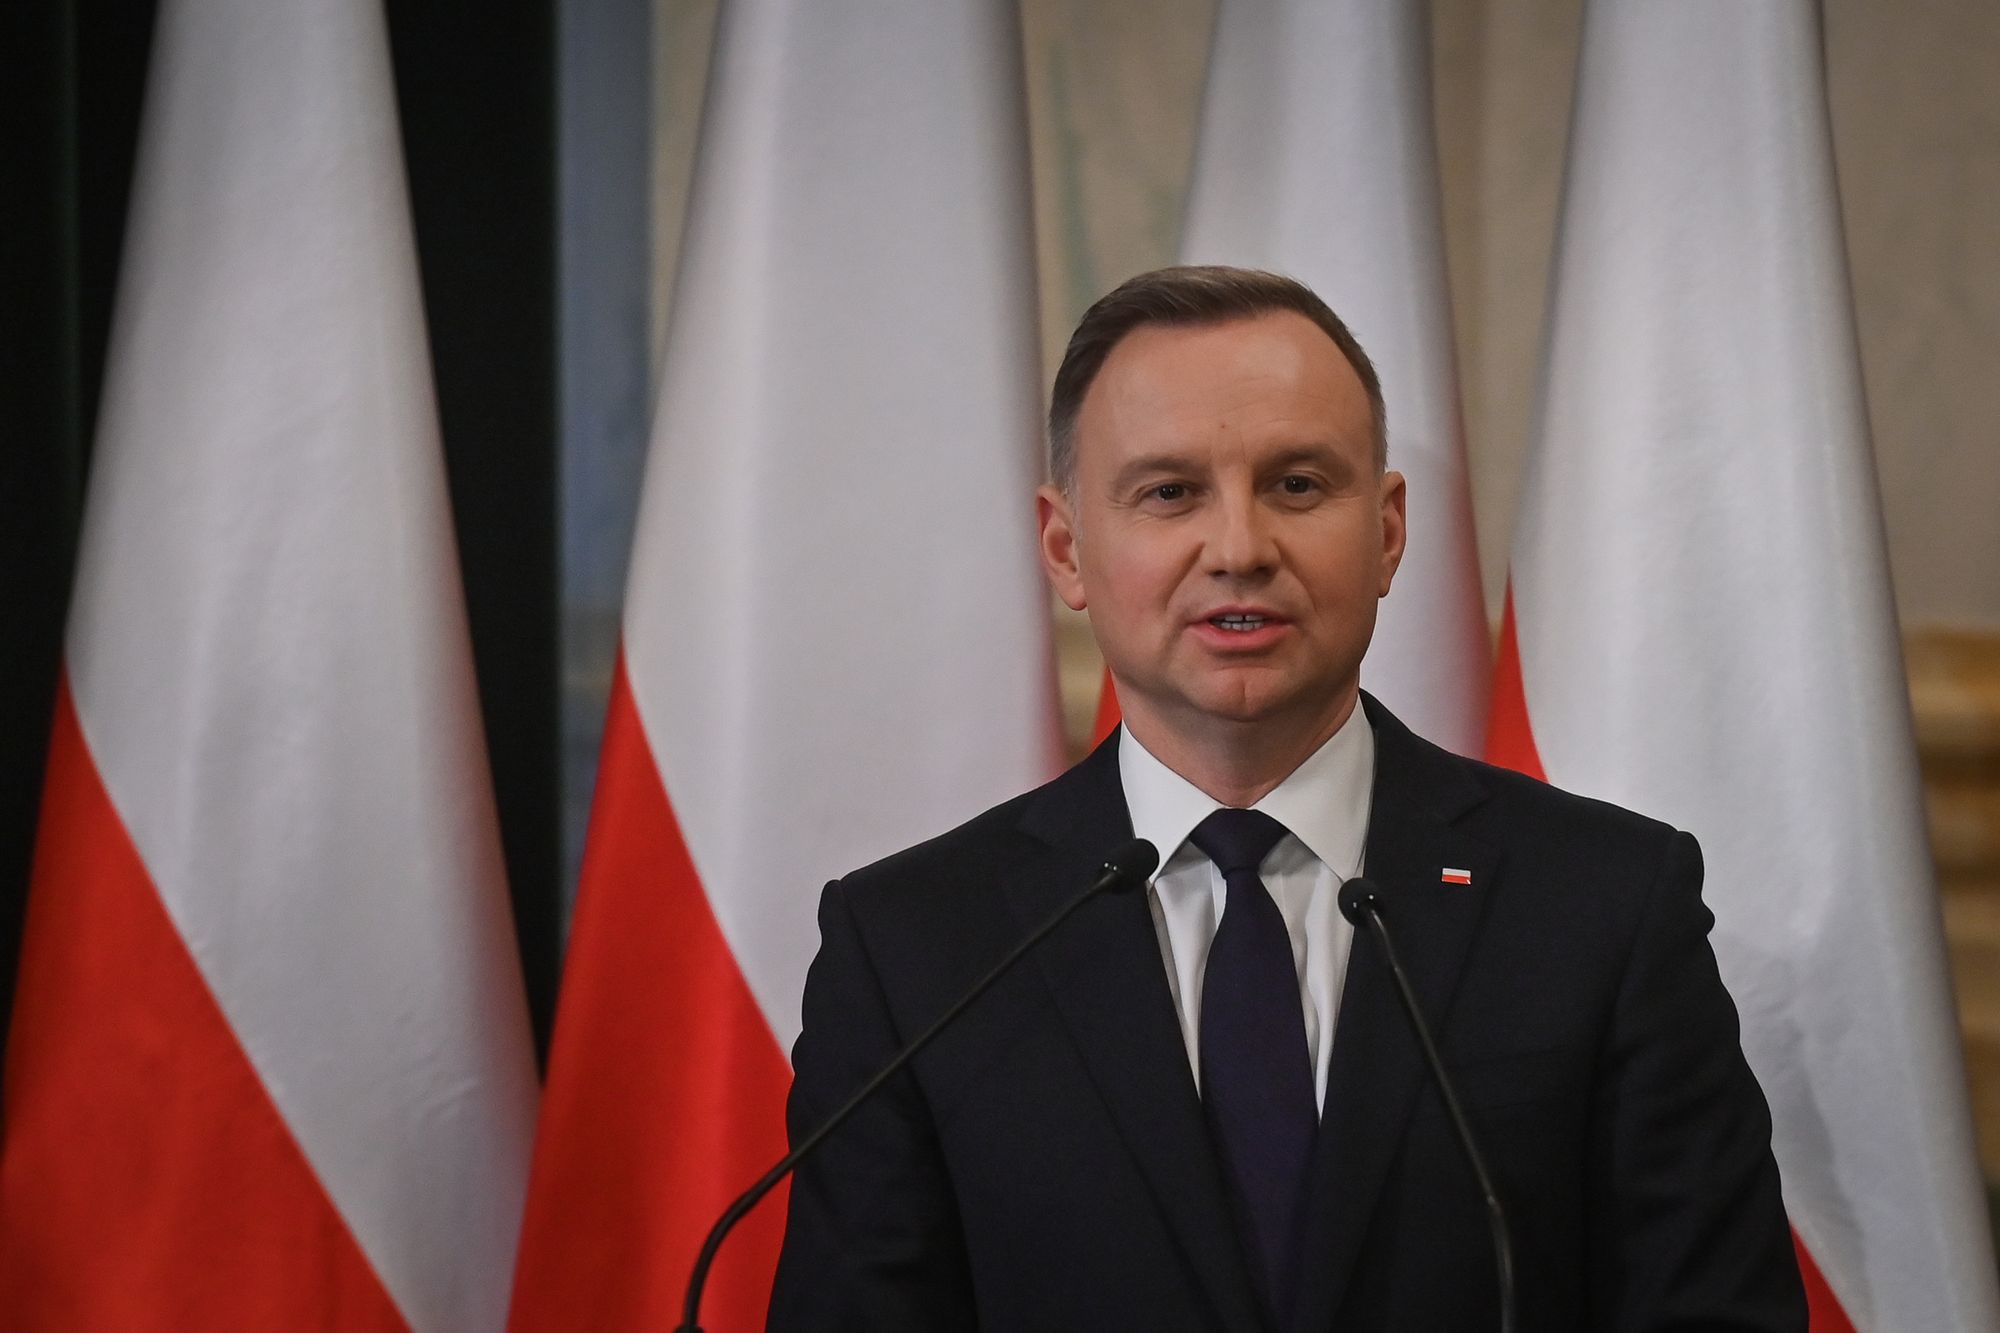 Duda: We know that if Russia wins over Ukraine, it will attack other countries